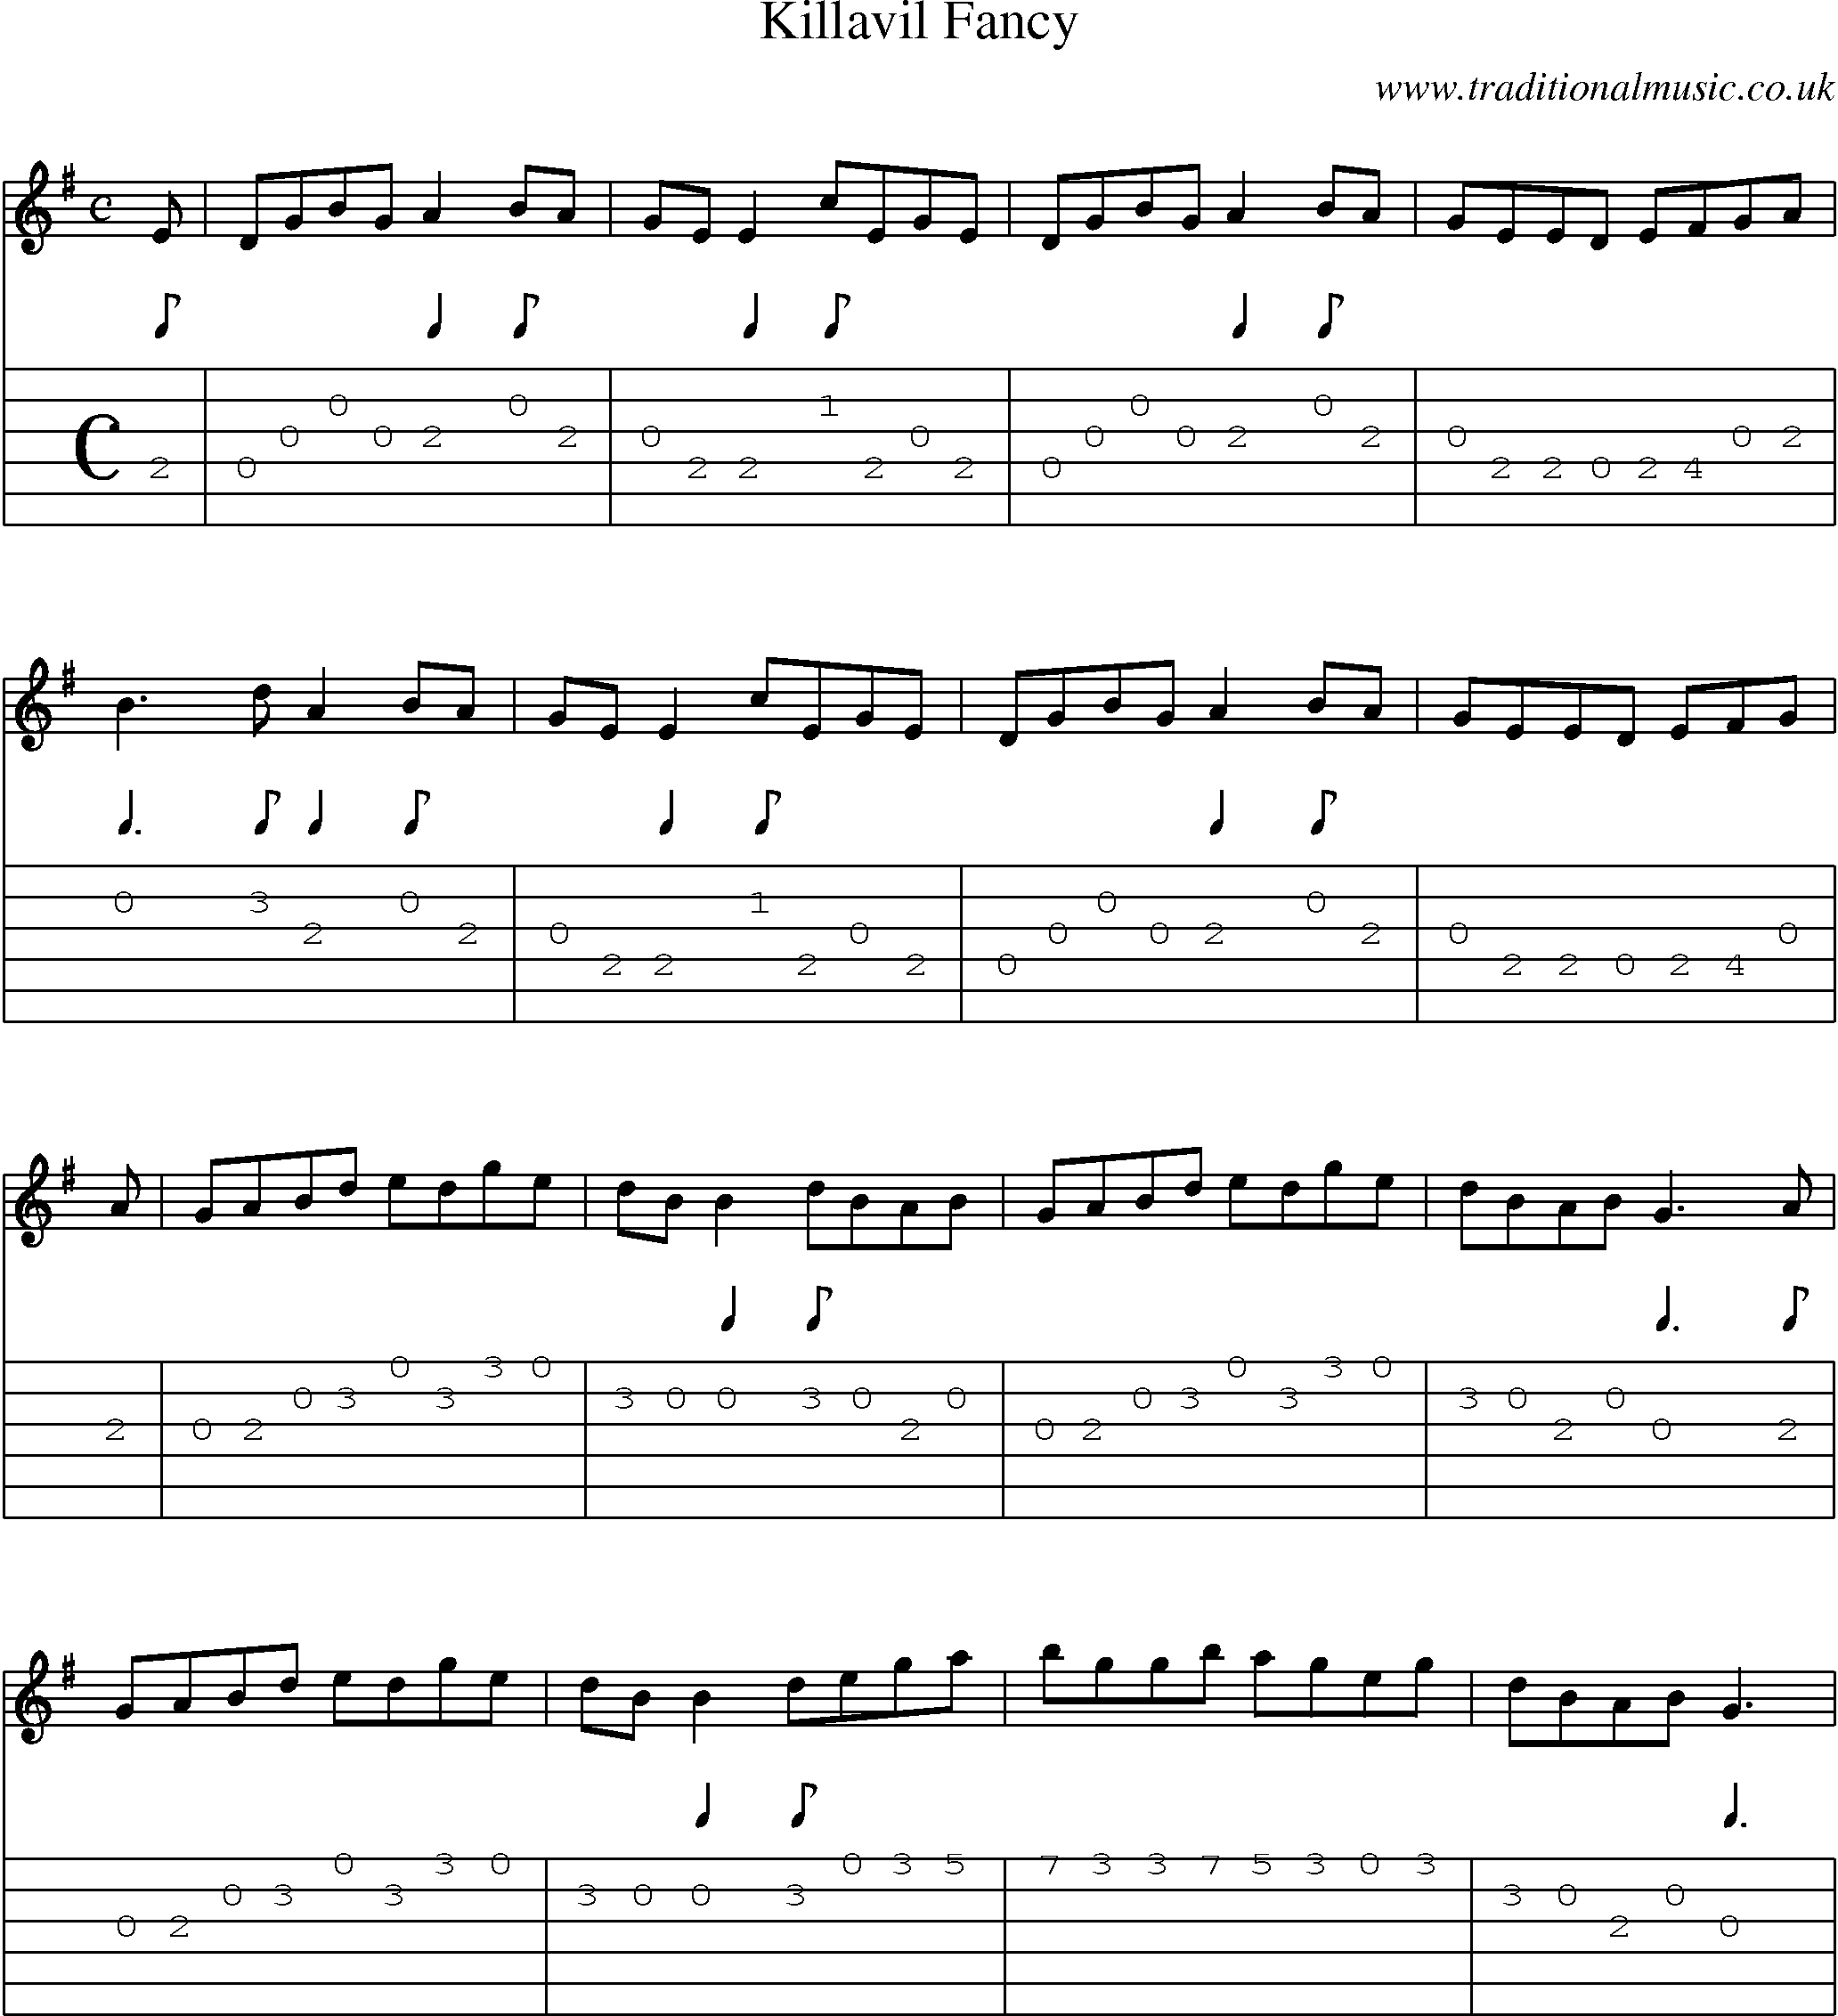 Music Score and Guitar Tabs for Killavil Fancy